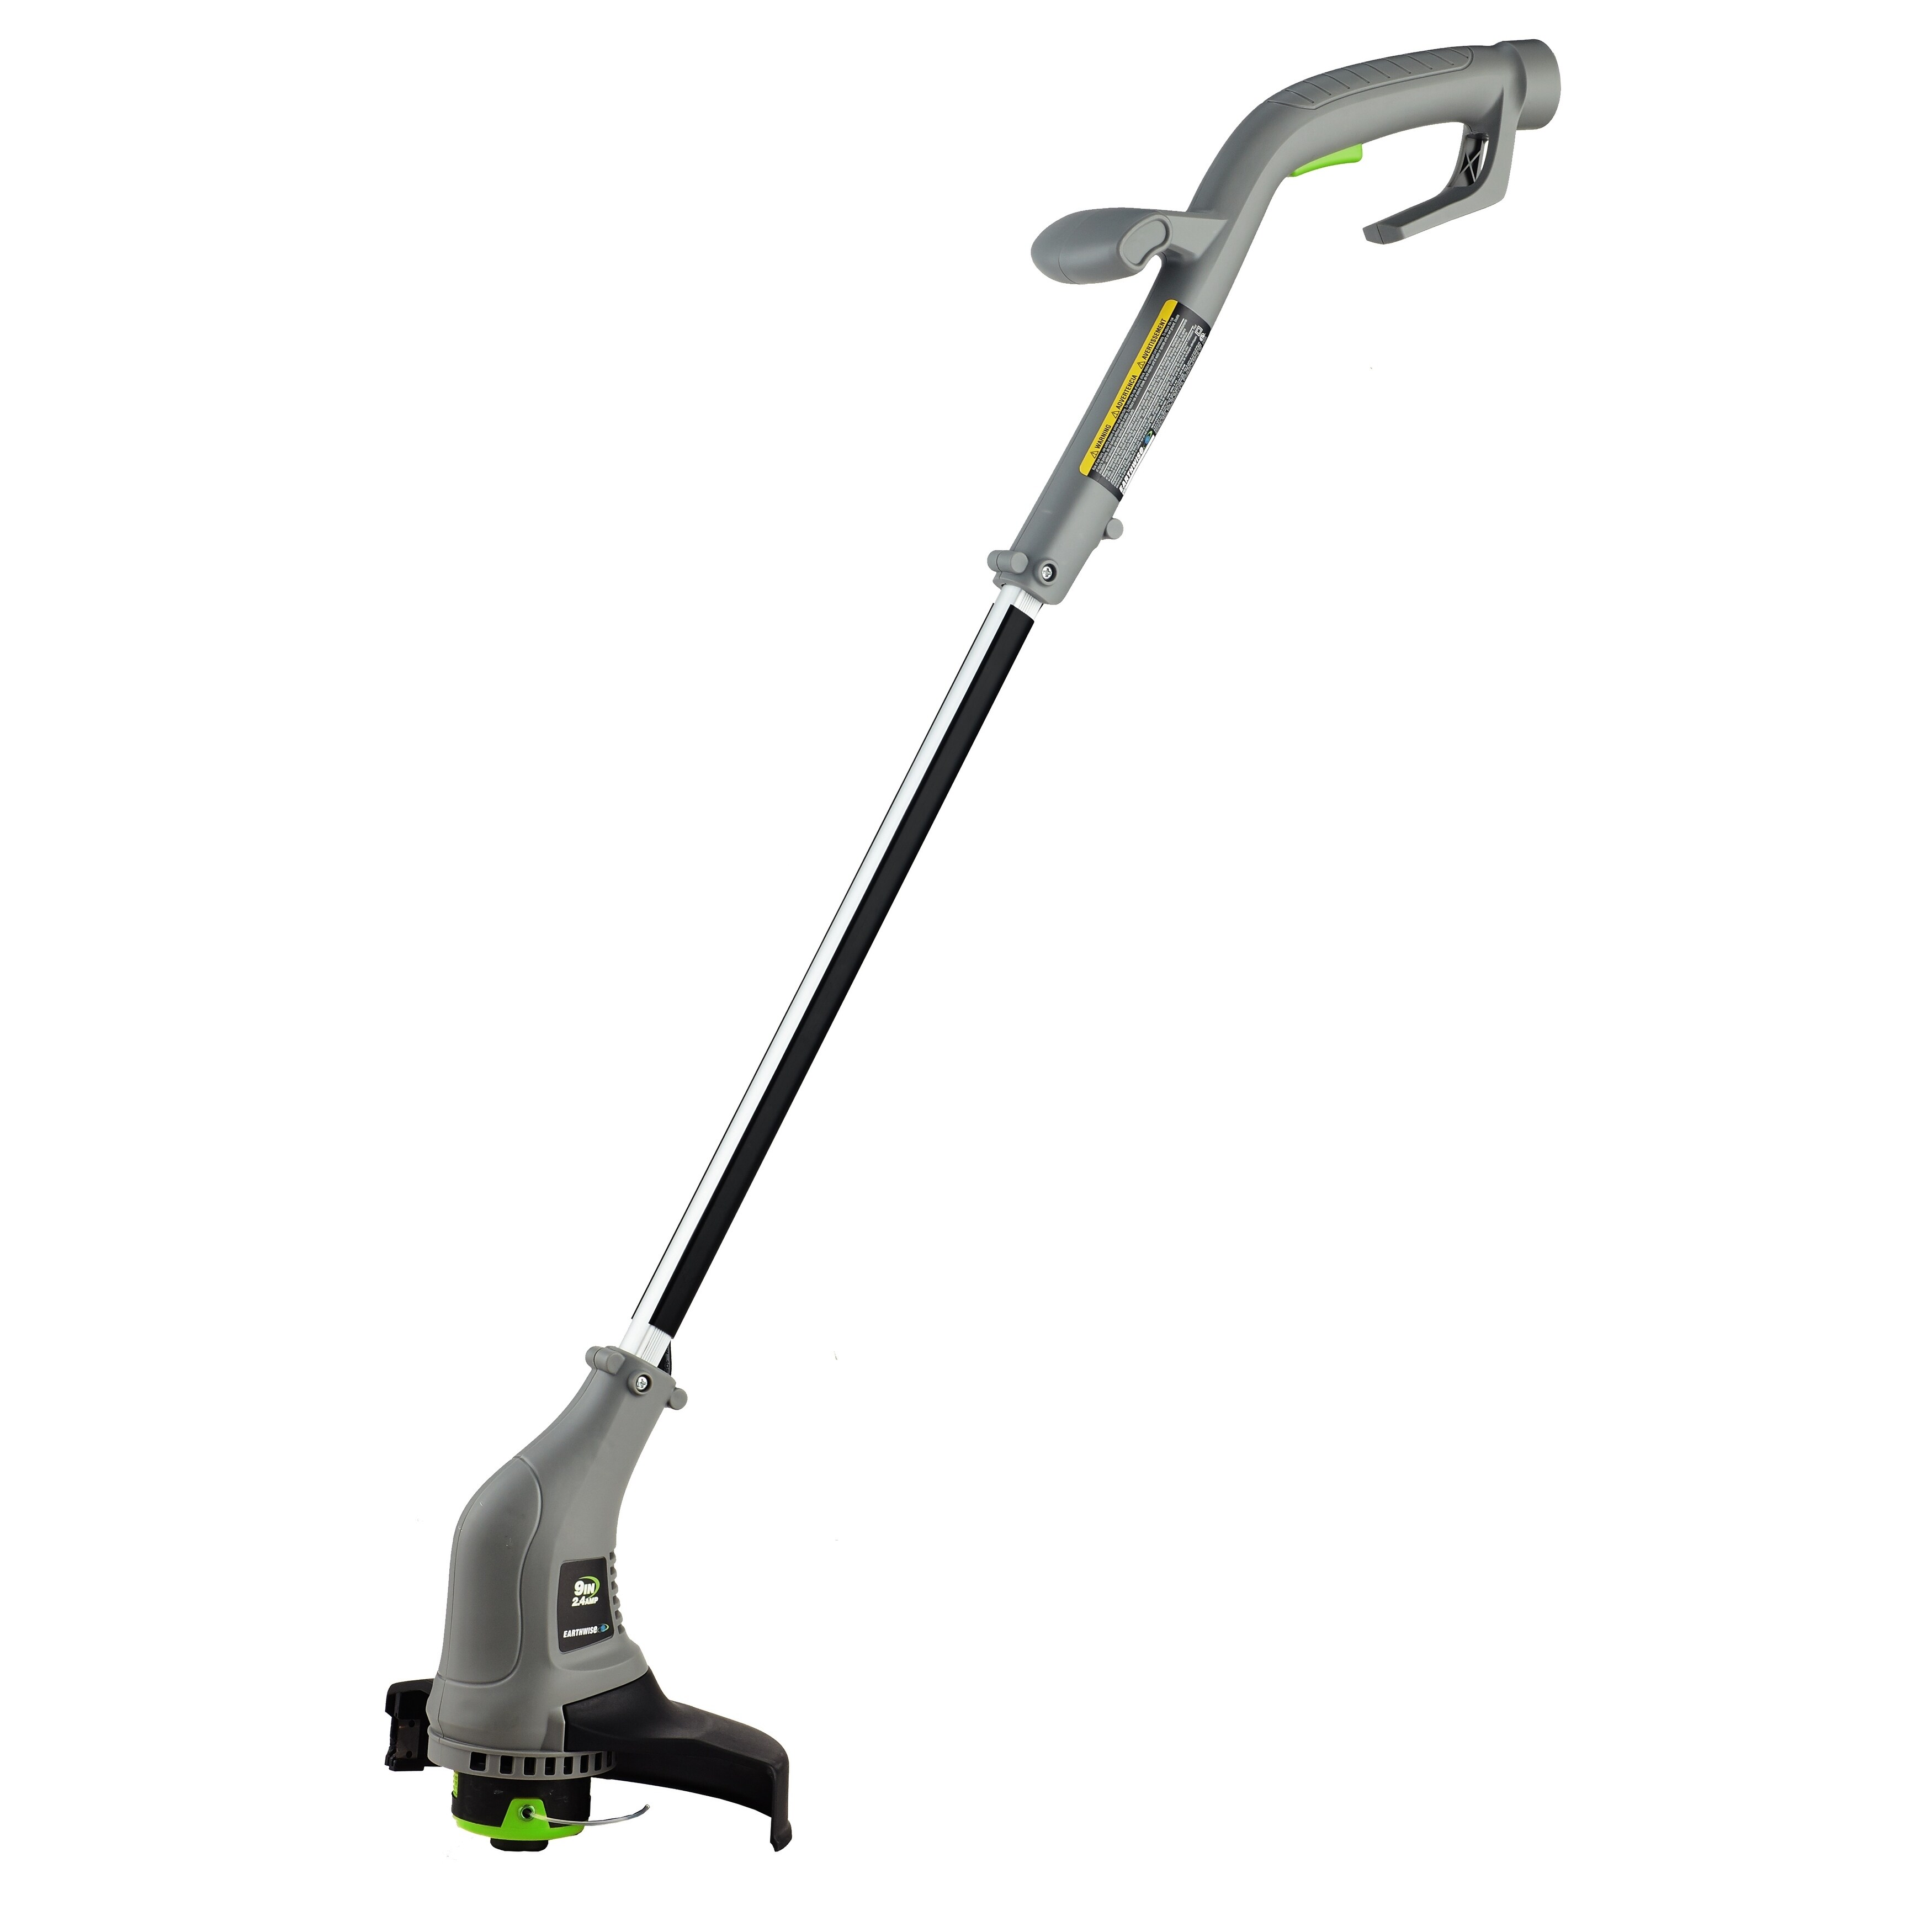 electric line trimmer